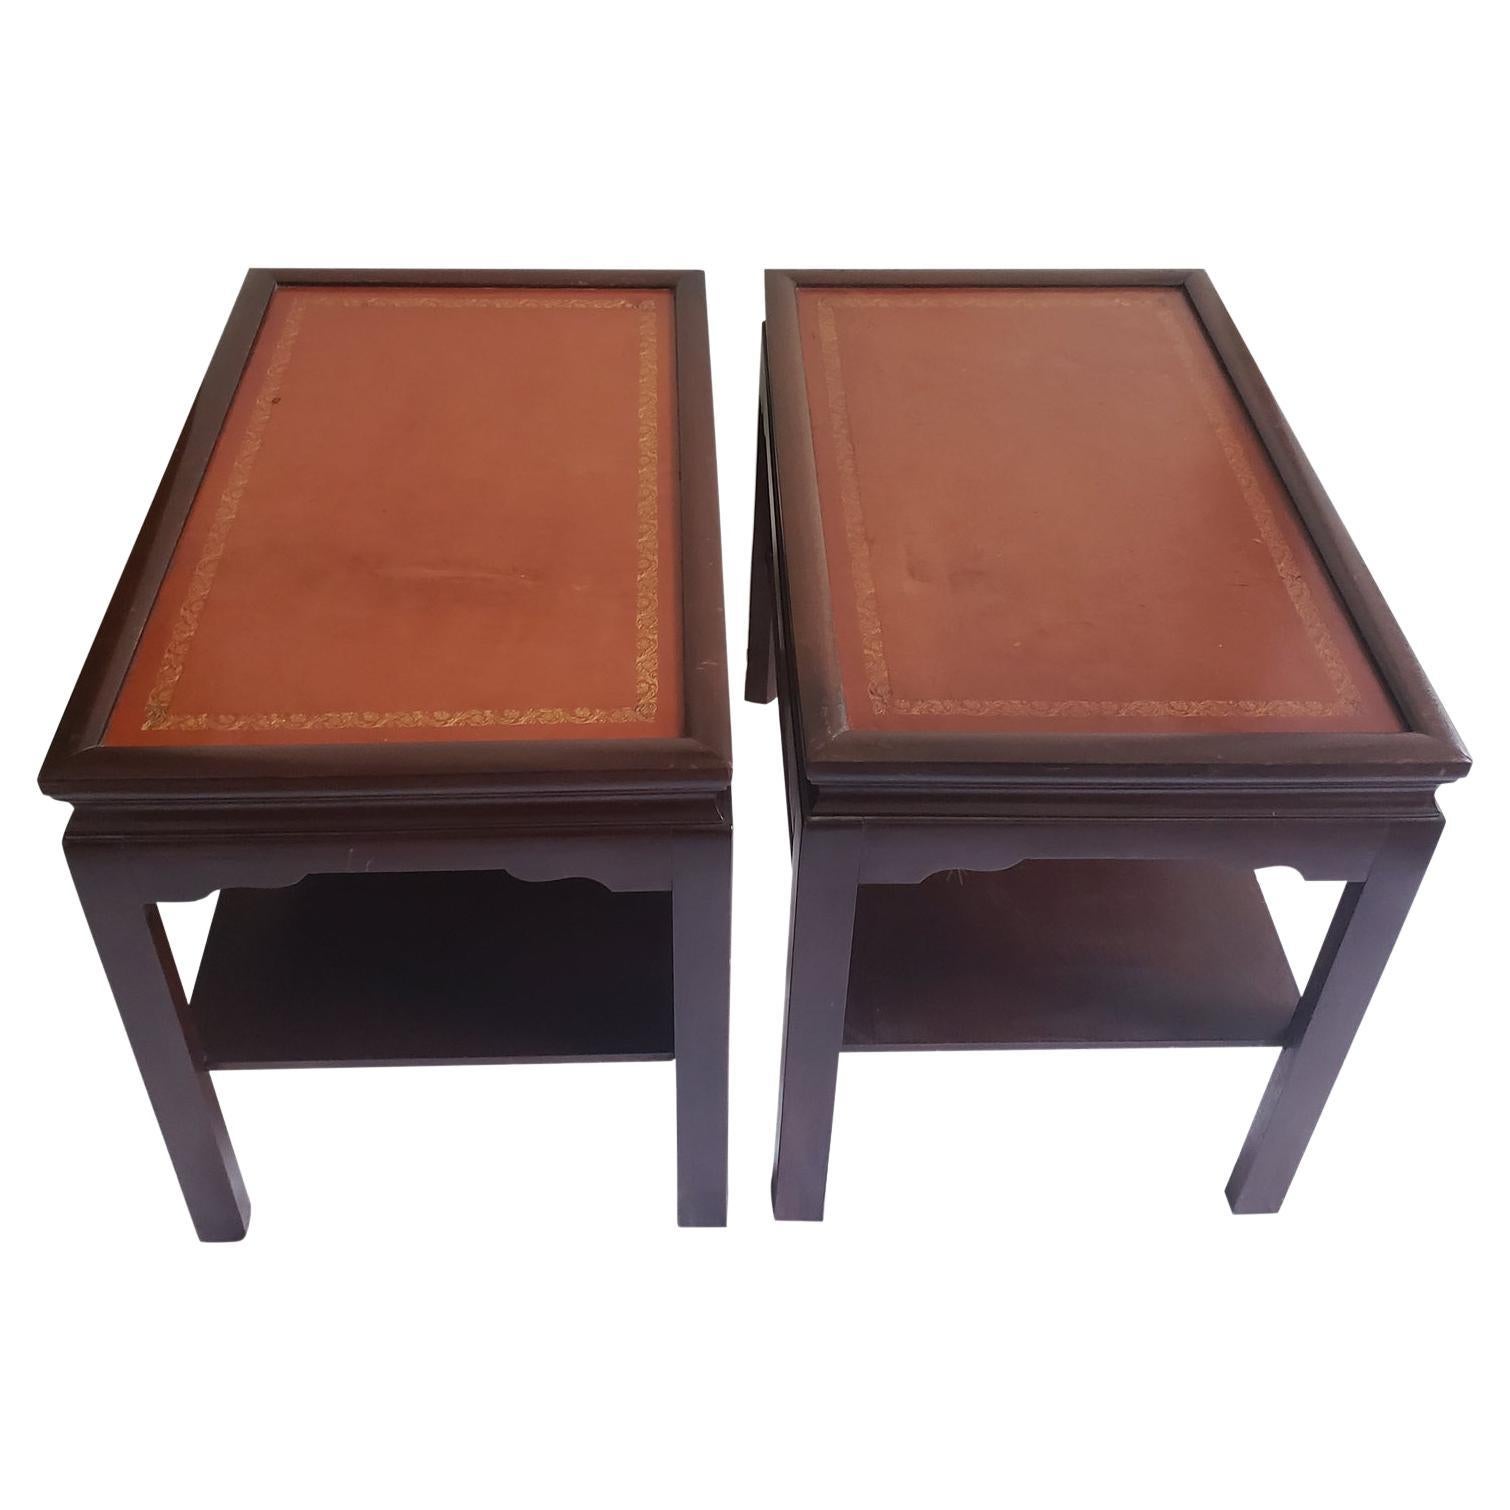 1940s Two-Tier Leather and Stinciling Top Side Tables, a Pair For Sale